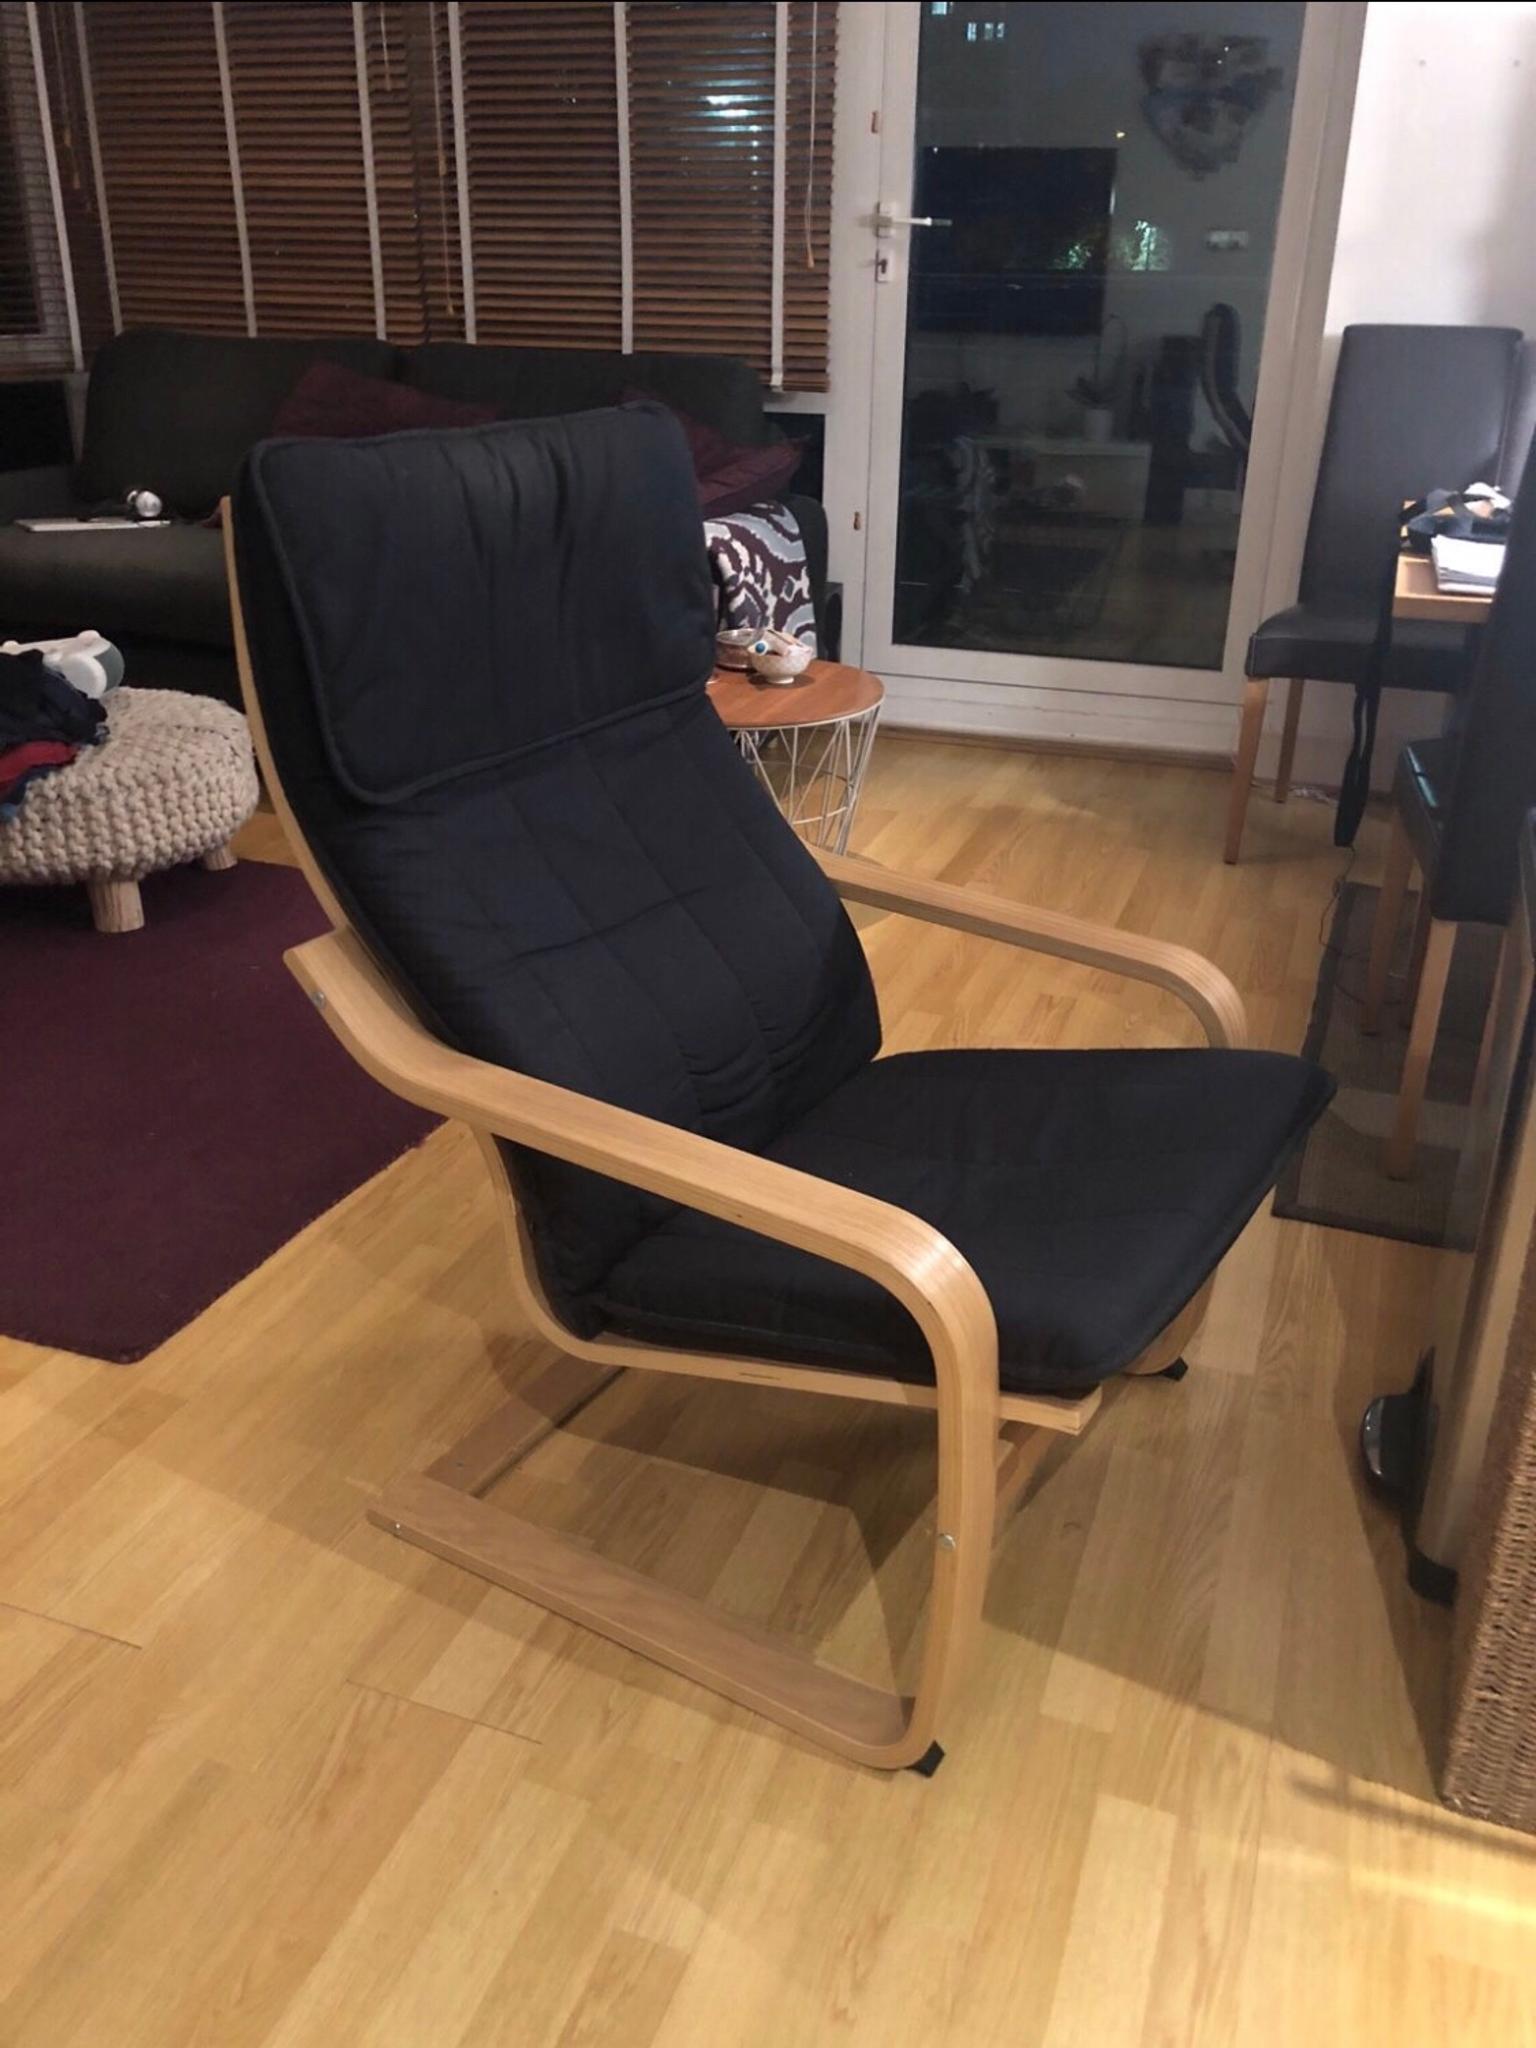 Ikea Poang Chair In E1w London For 35 00 For Sale Shpock